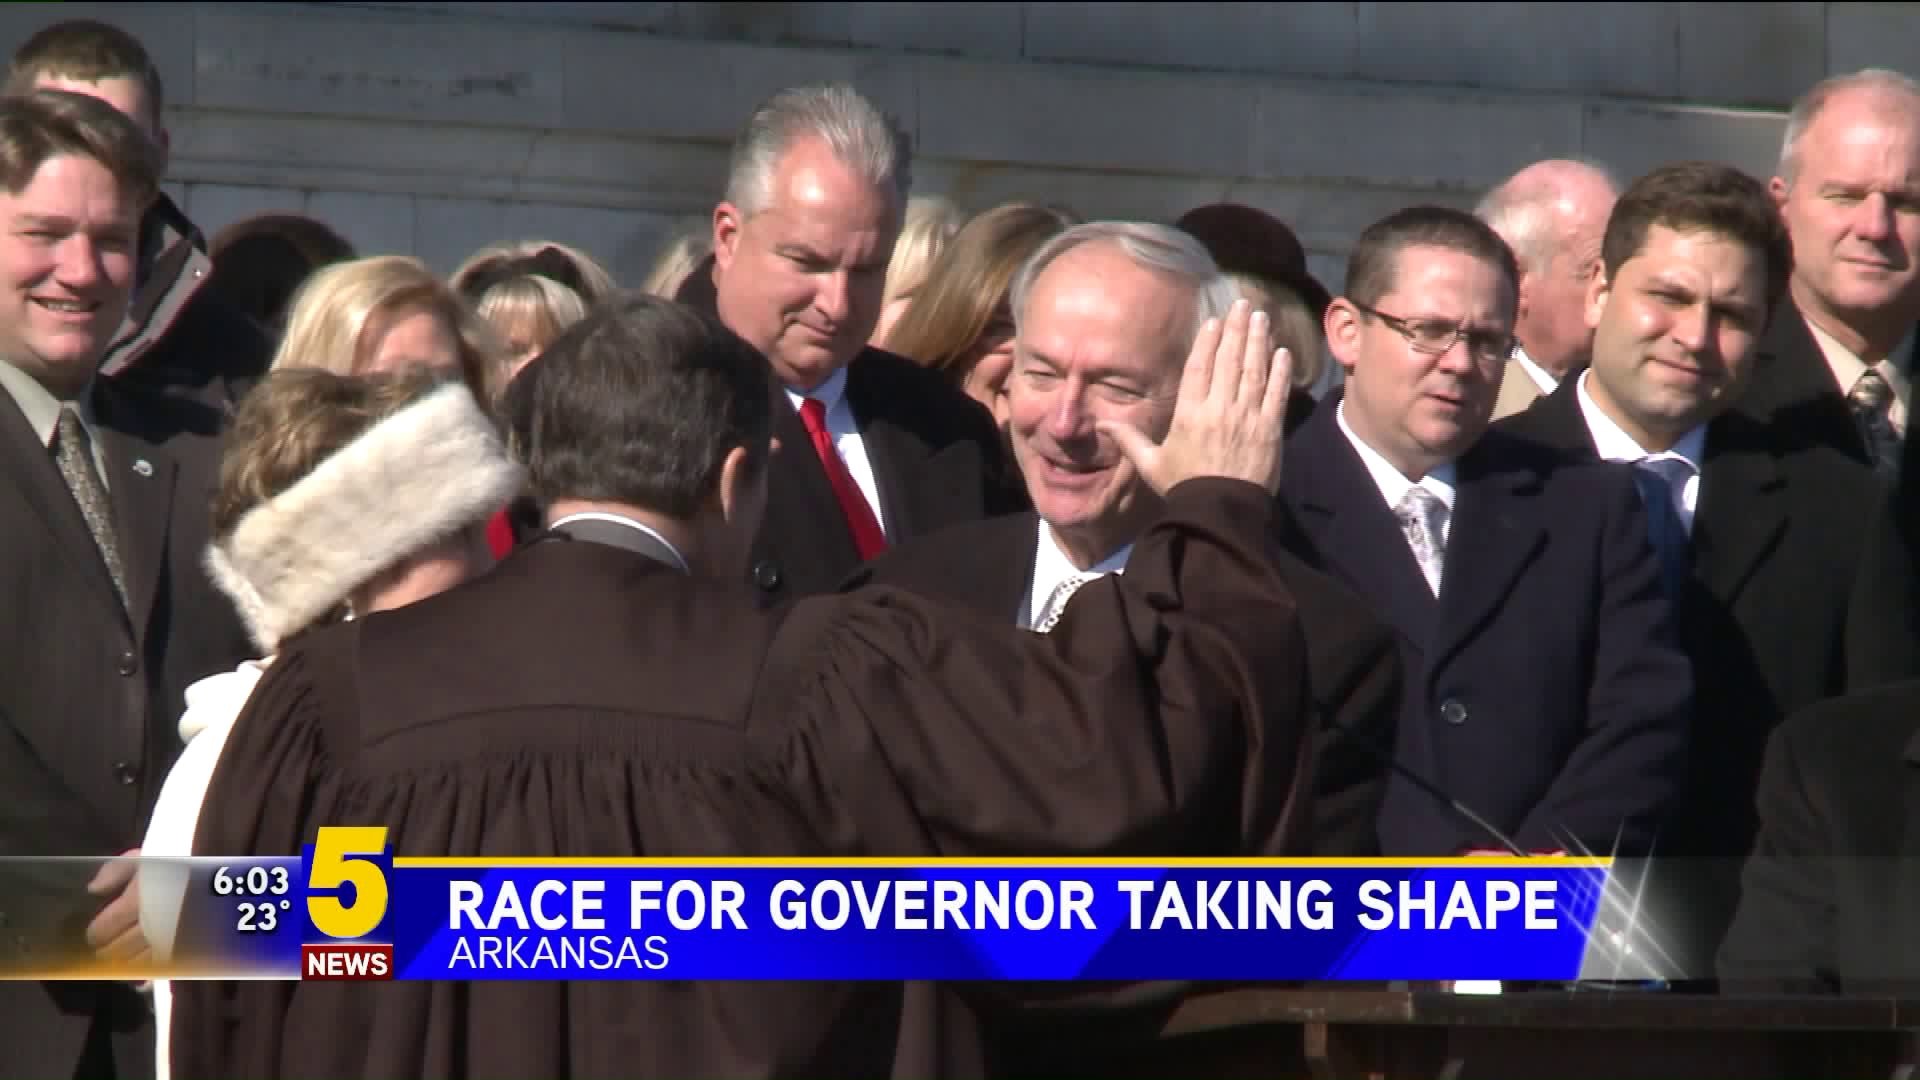 Race For Governor Taking Shape